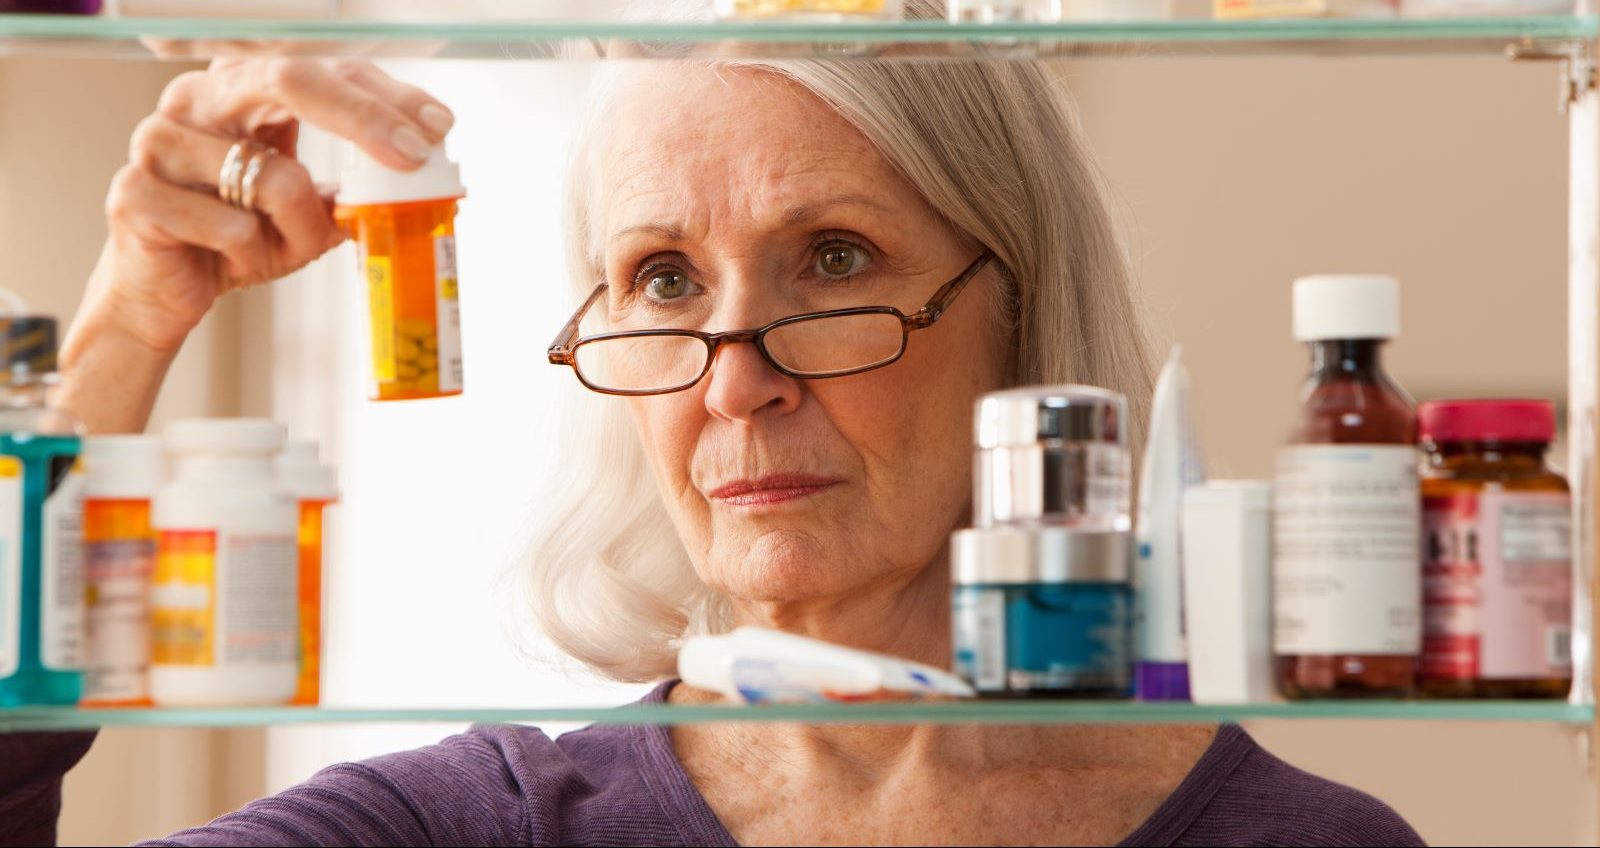 Older Adults, Check Your Pills: The Hidden Risks of Too Many Medications